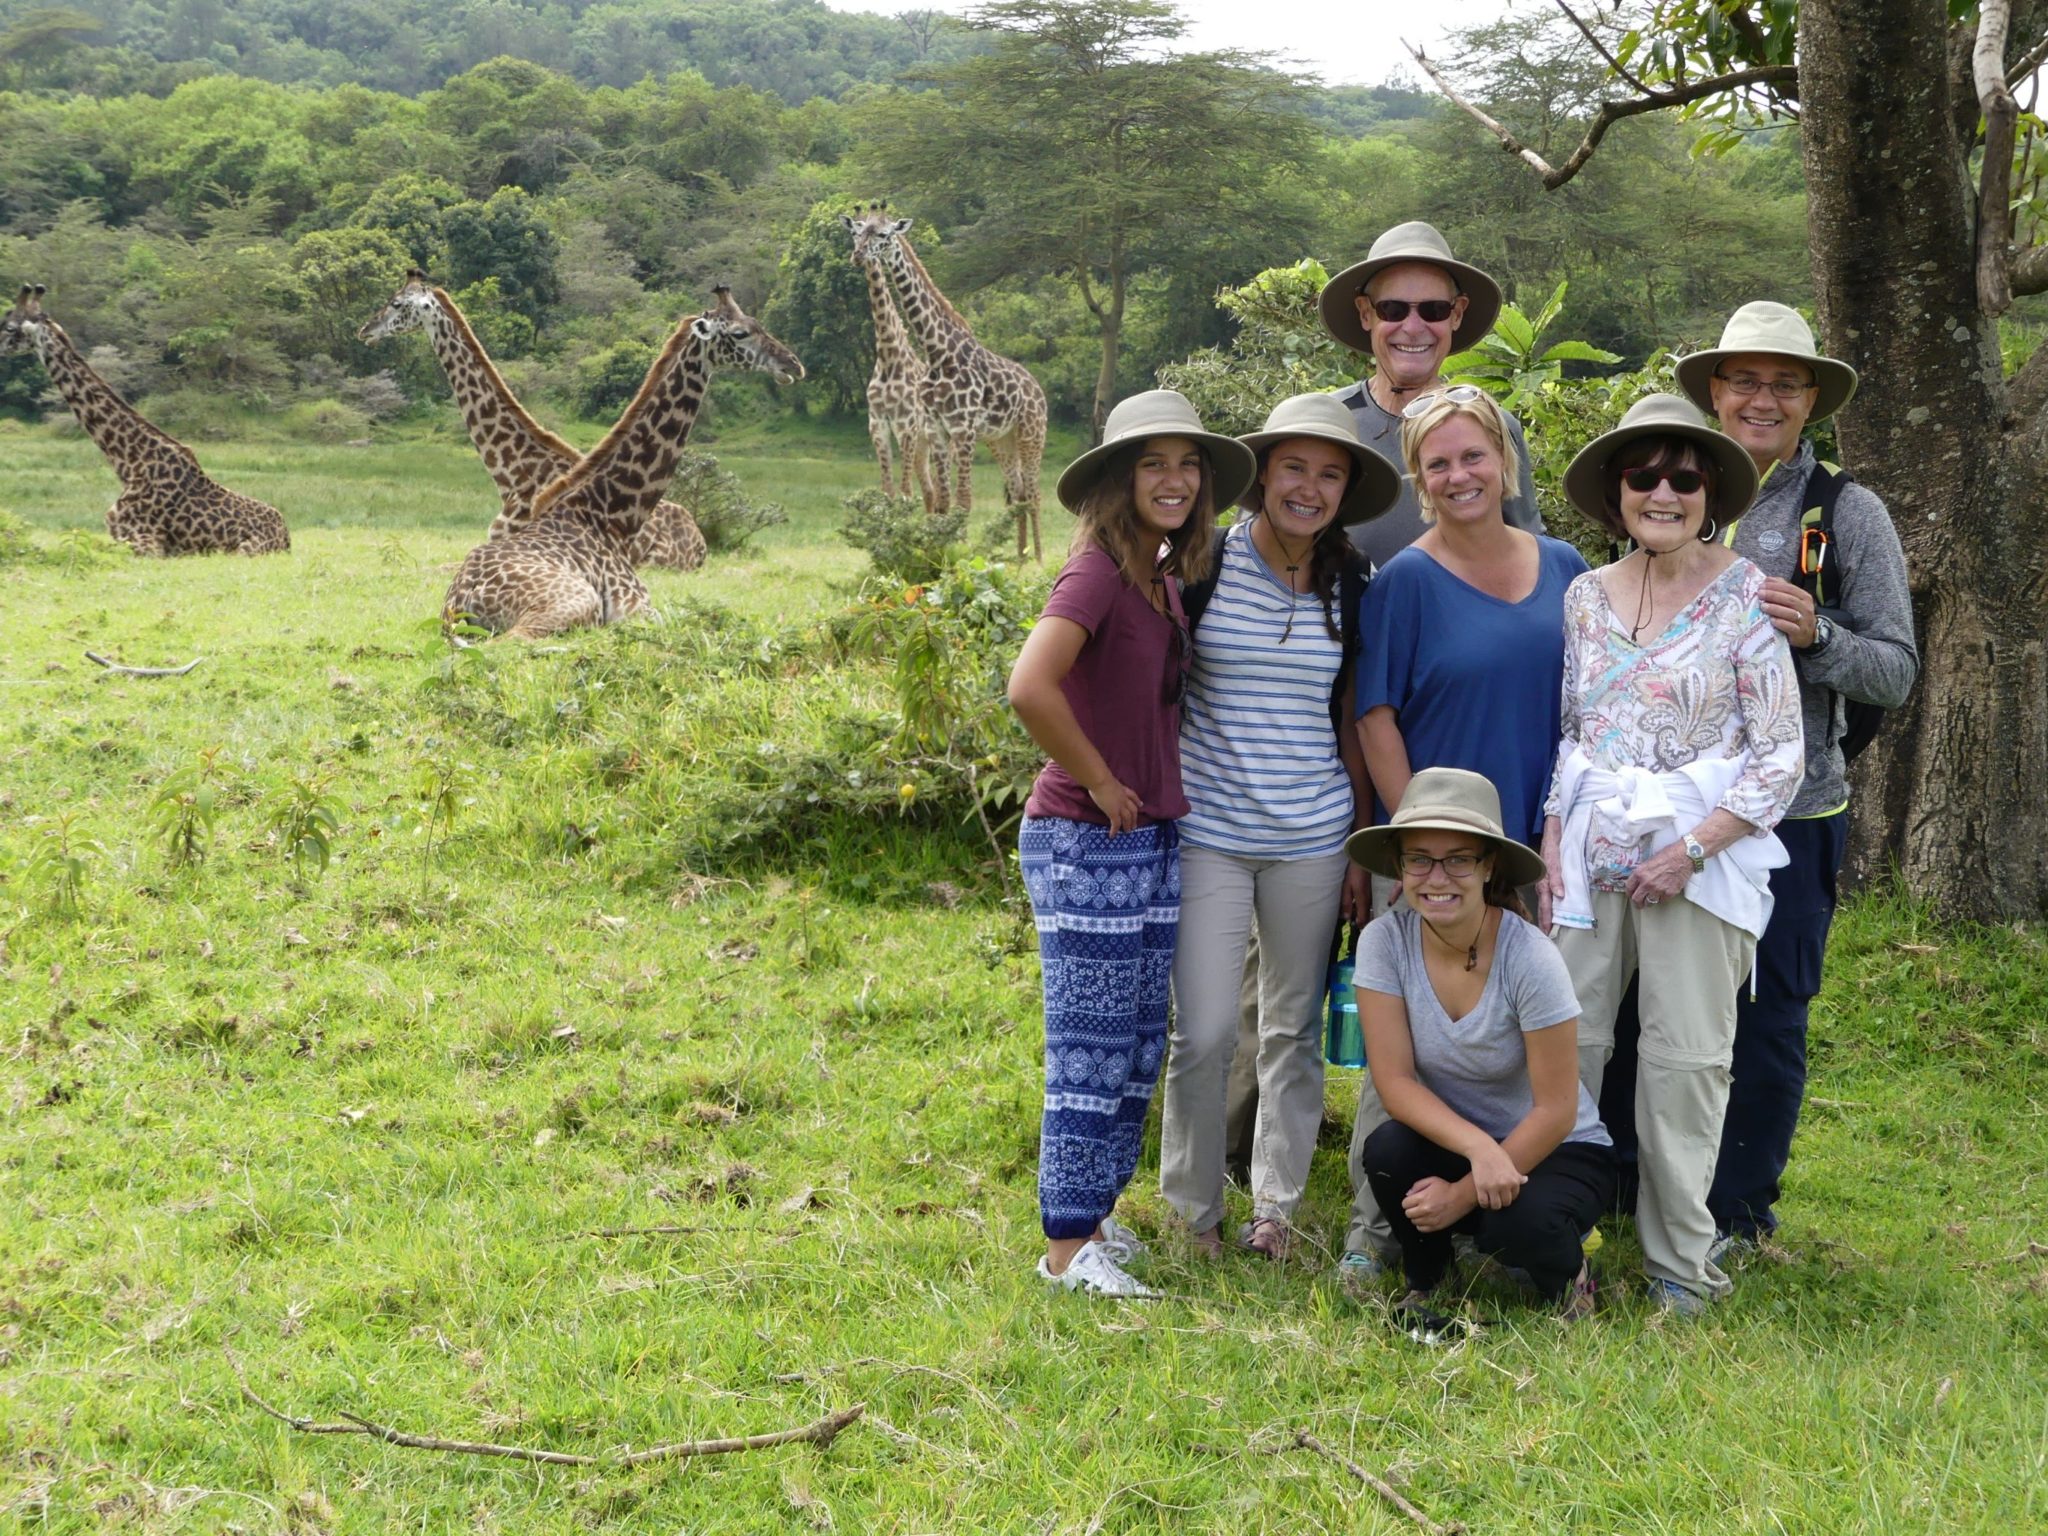 a family taking a photo with giraffes while on a family safari